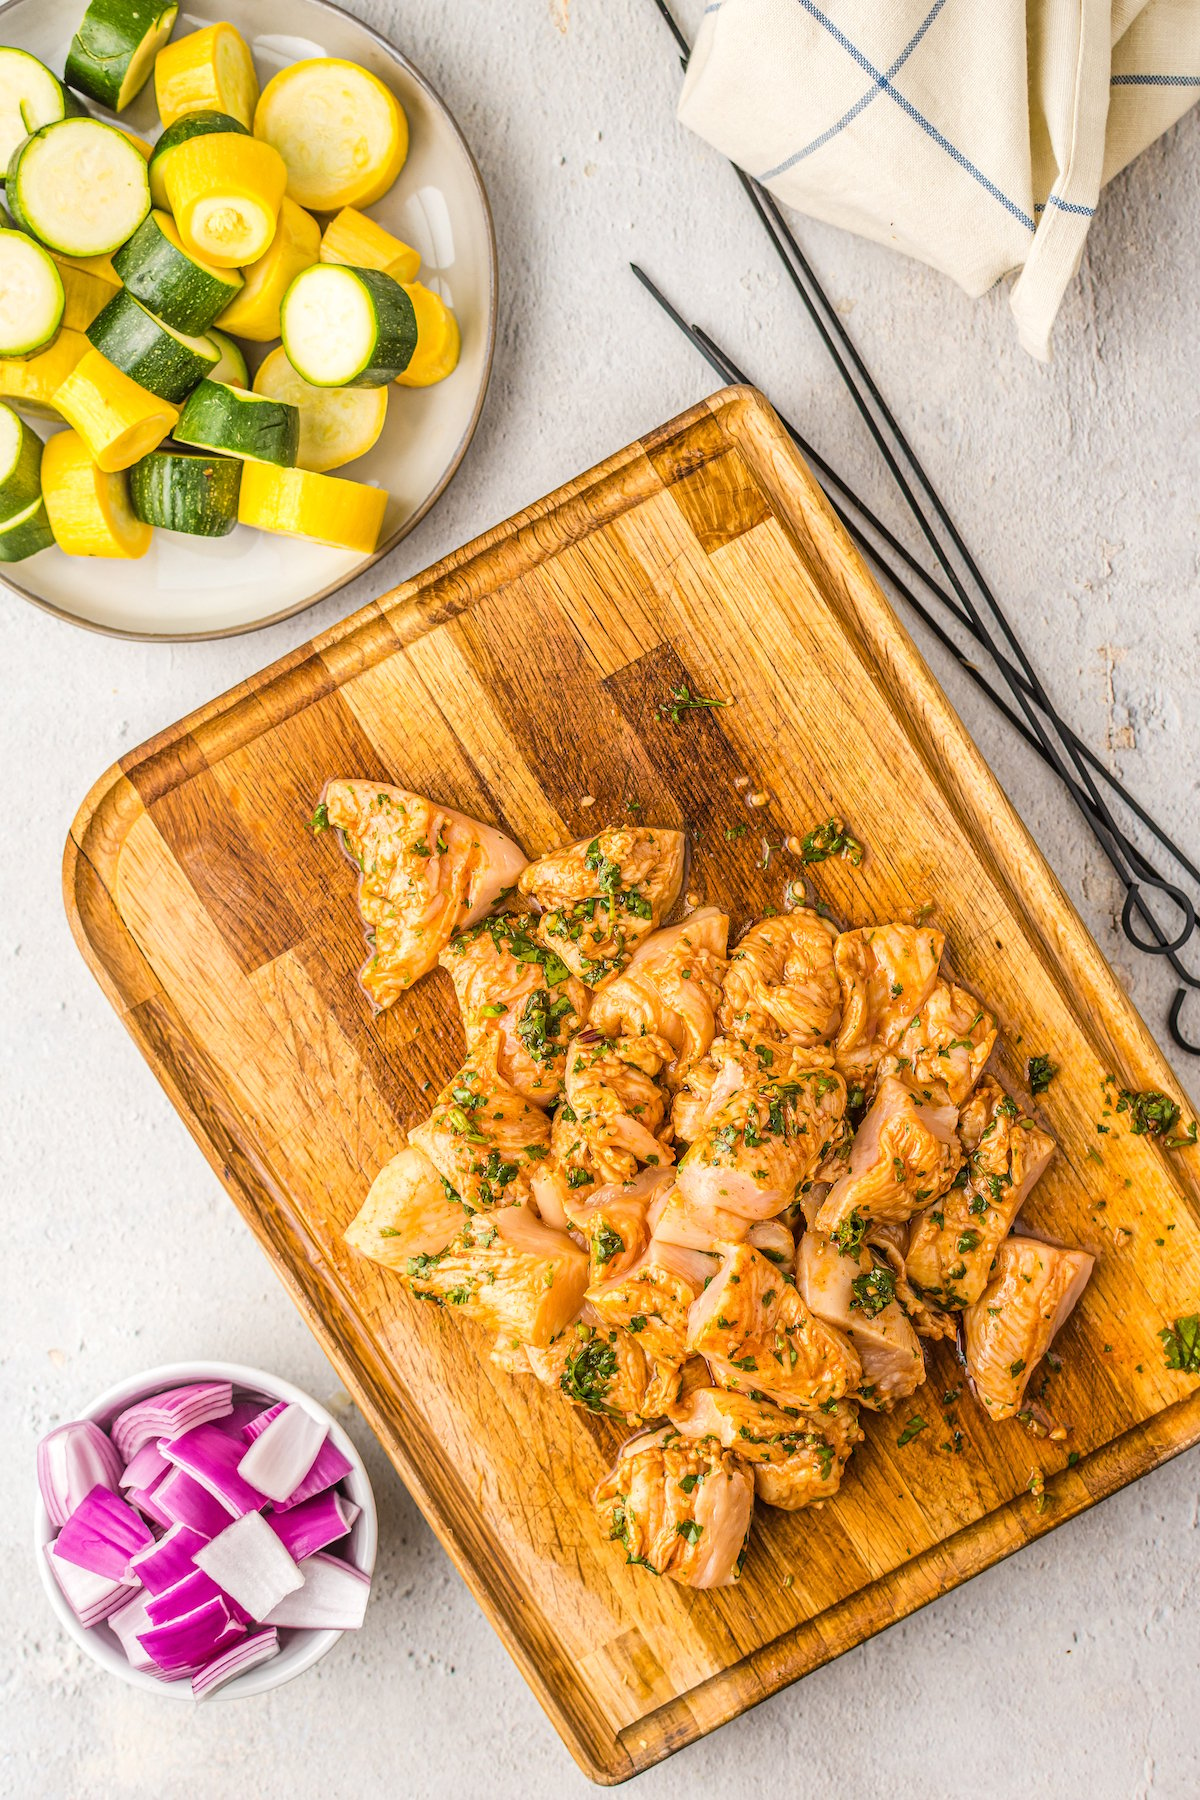 Marinated chicken on a cutting board.